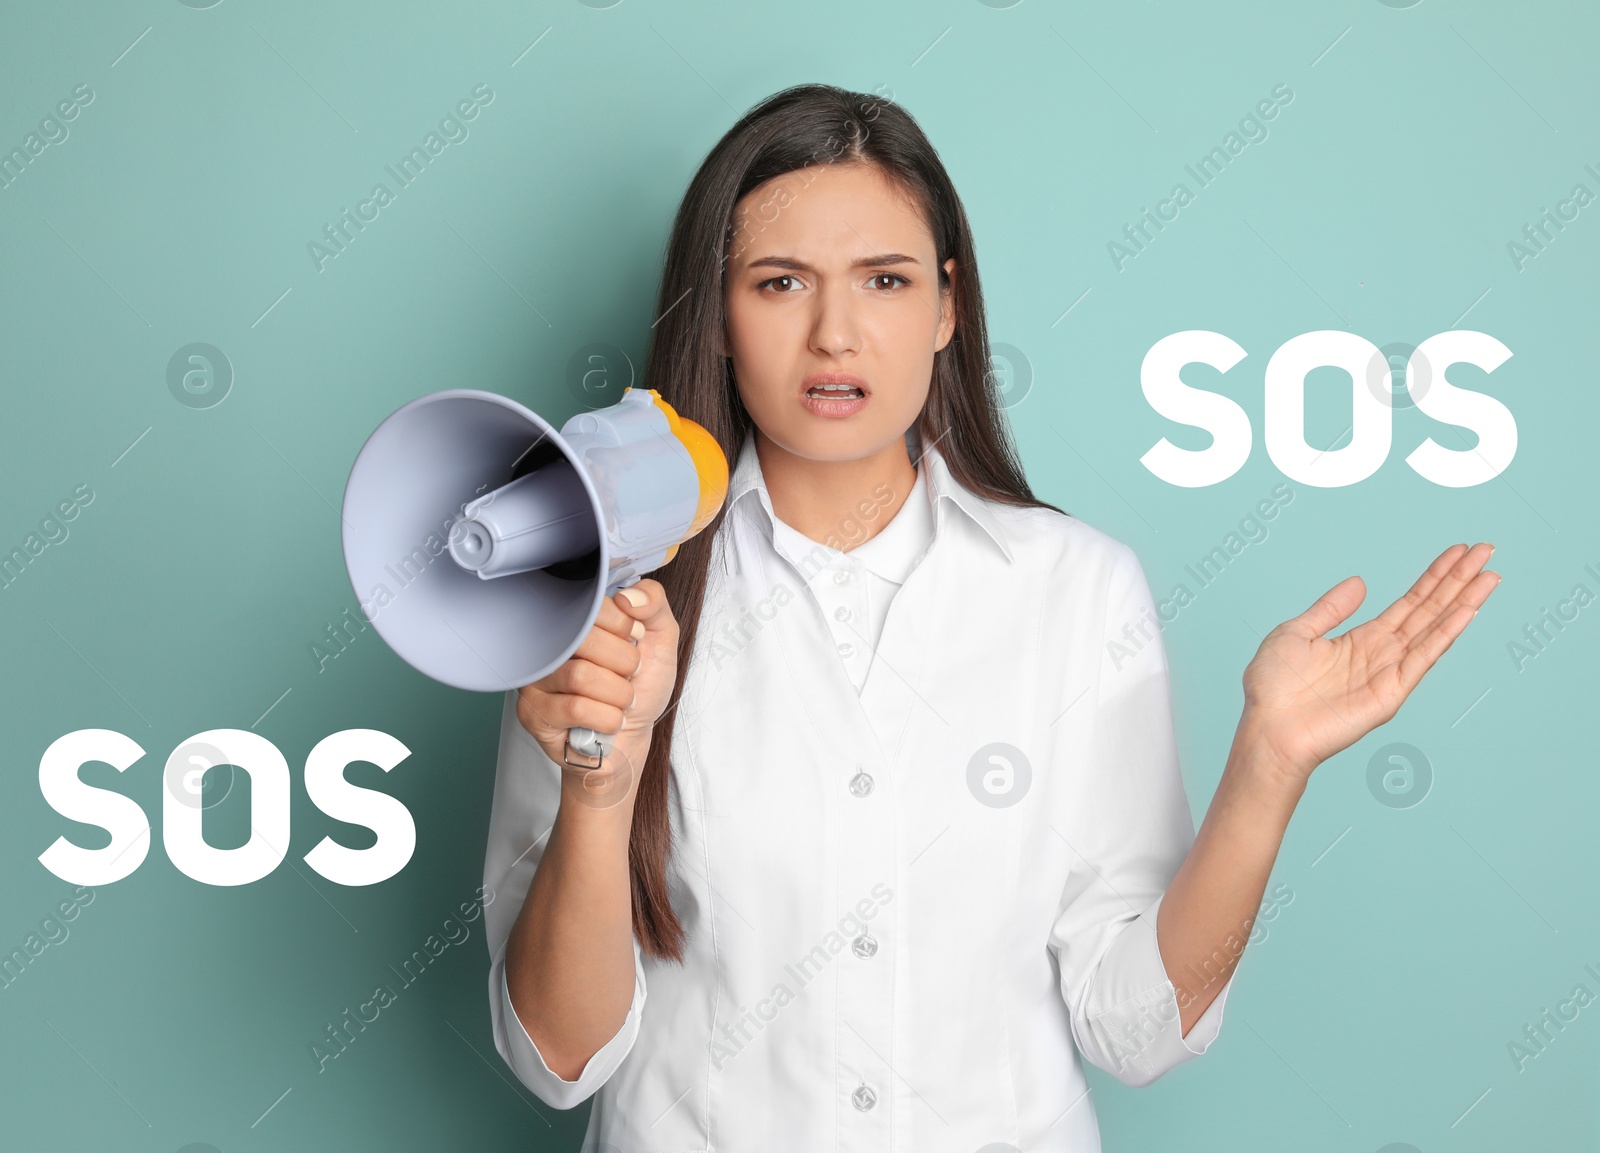 Image of Doctor with megaphone and words SOS on color background. Asking for help